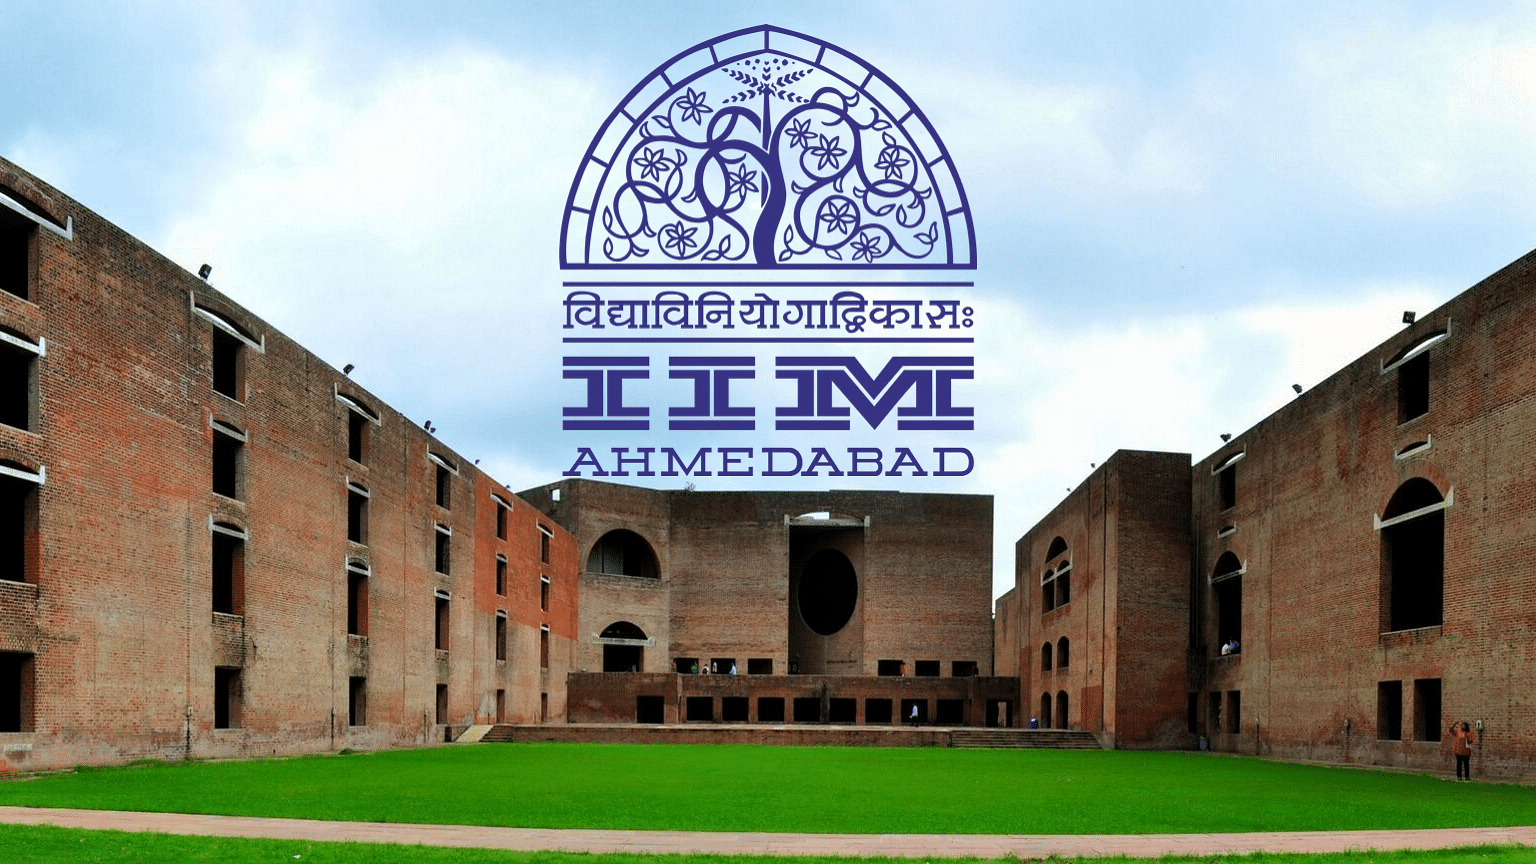 A strongly-worded open letter questions why IIM-A has chosen to not have SC/ST/OBC reservations in PhD admissions.